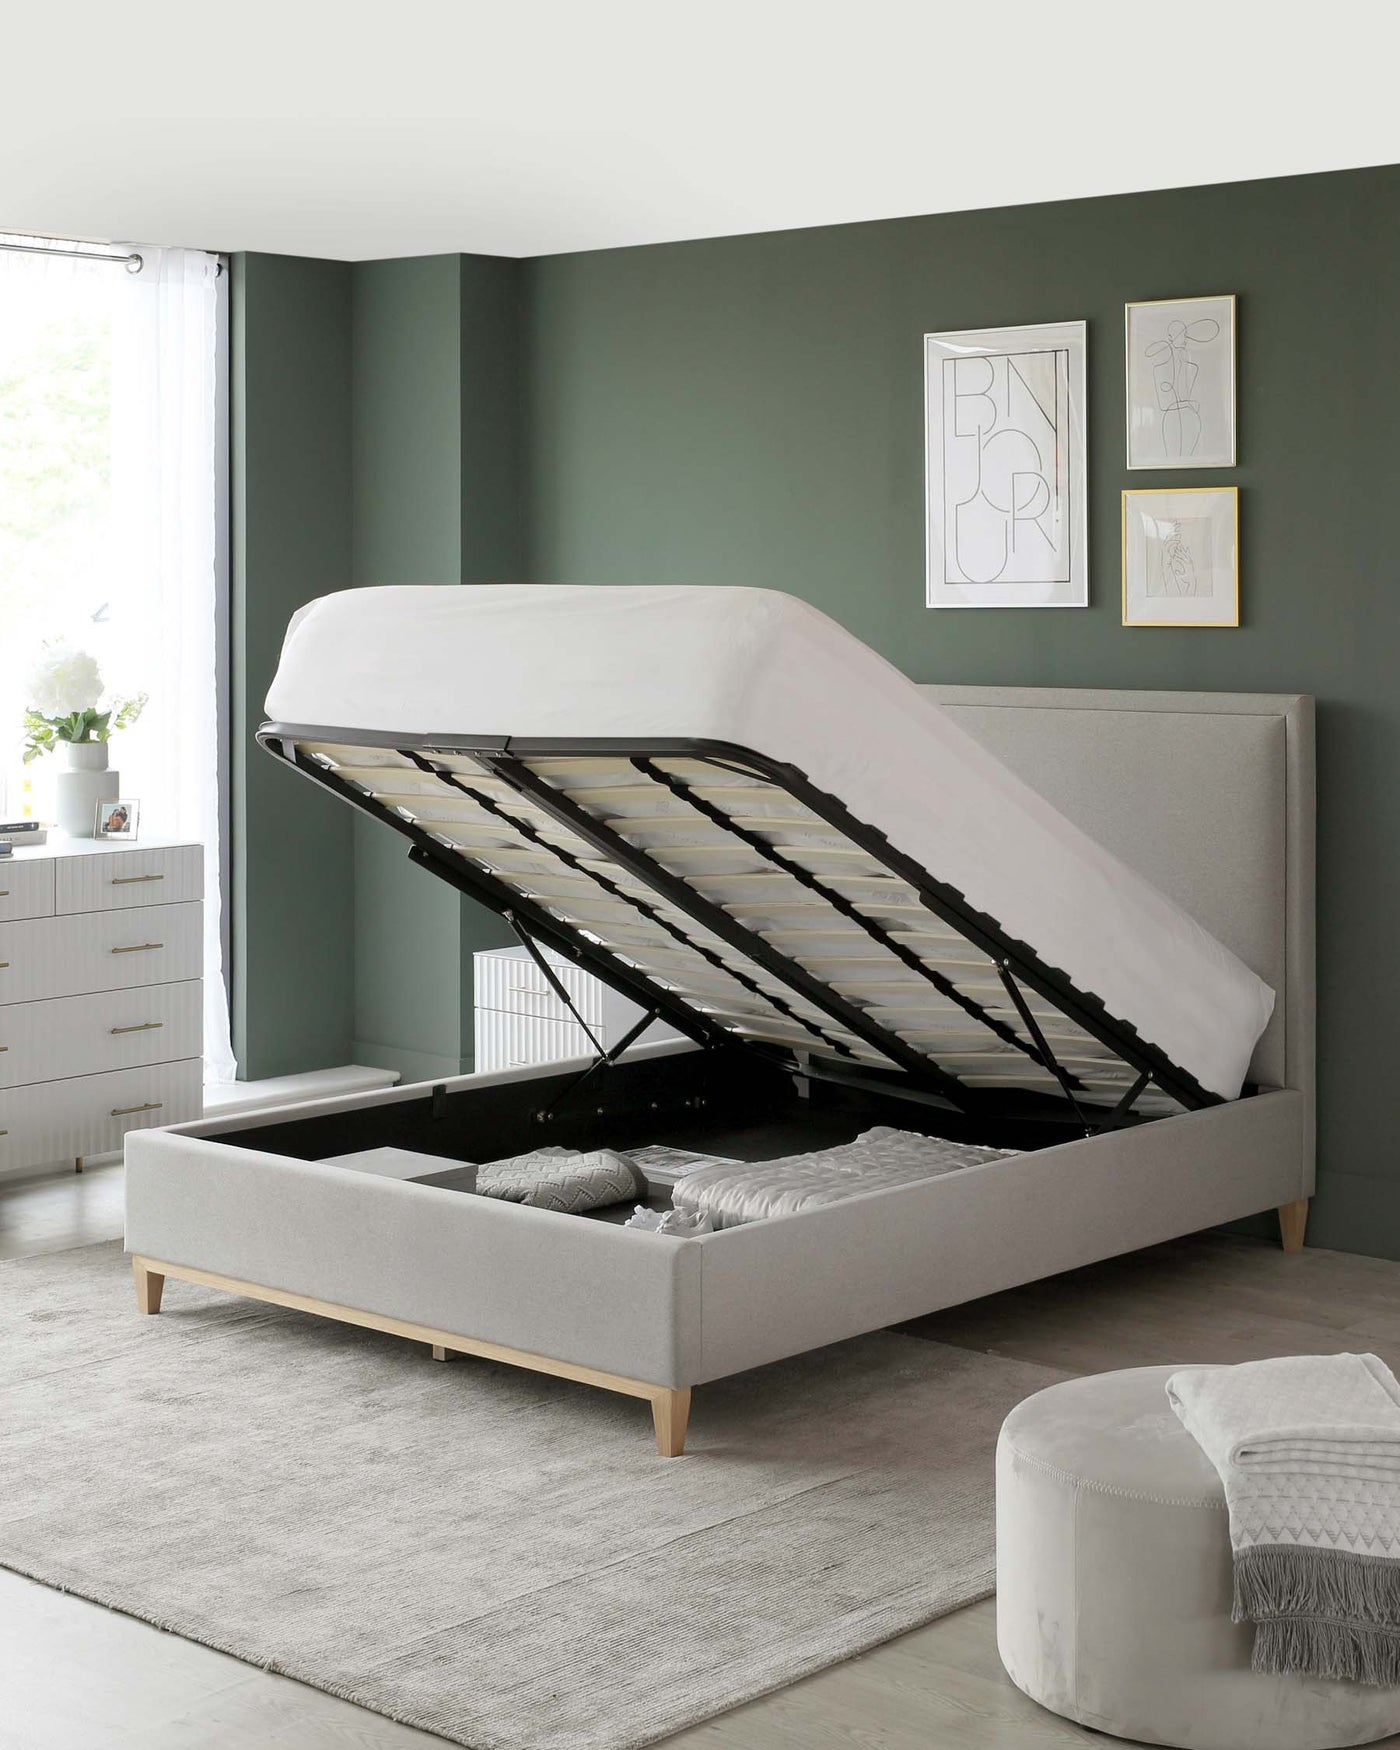 Contemporary light grey fabric upholstered storage bed with a lifted mattress revealing spacious under-bed storage, complemented by a small white bedside chest of drawers topped with a vase of flowers and a simple round, grey ottoman. The bed is accented with light wooden legs and framed art above, within a minimalist bedroom setting.